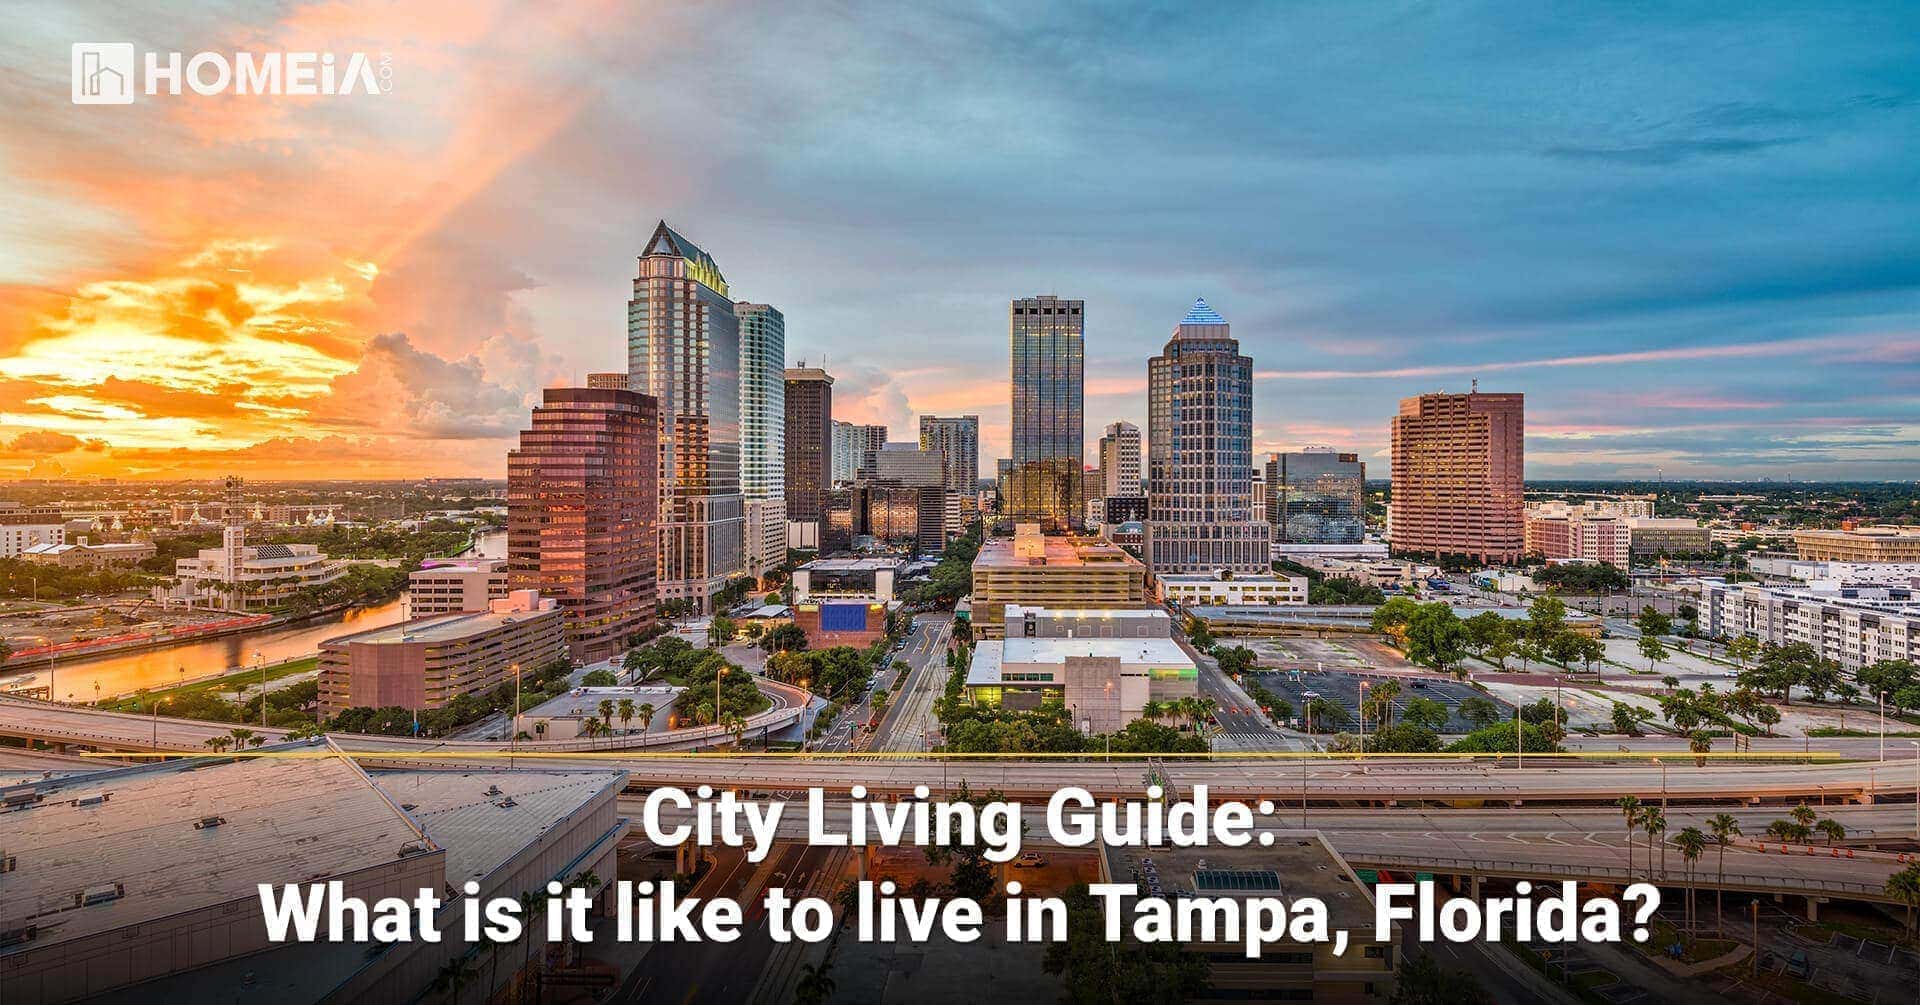 City Living Guide: What is it like to live in Tampa, Florida?